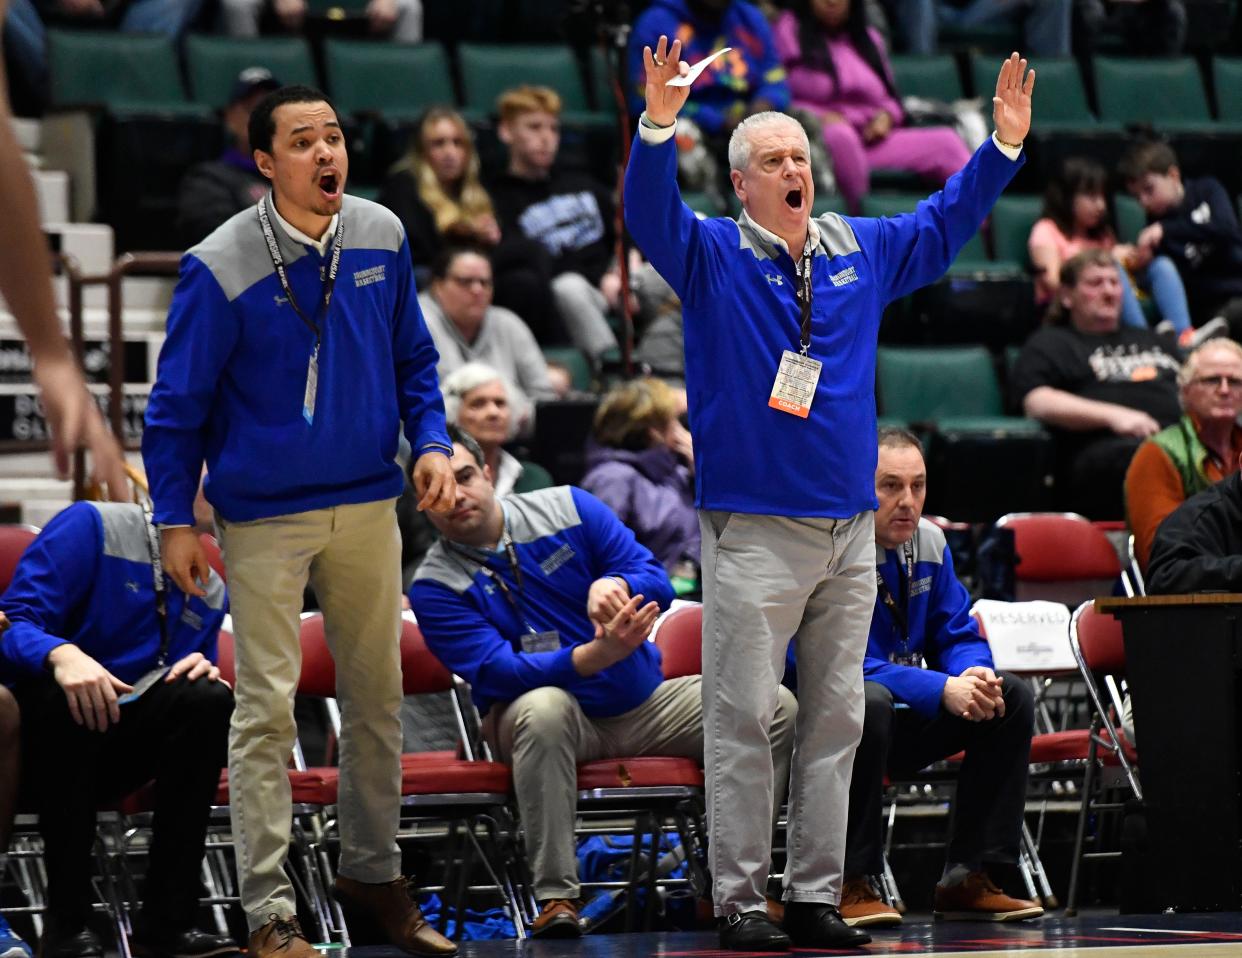 Irondequoit coach Kyle Trevas, center, was the JV coach and varsity assistant on the Eagles' run to the state championship game. During Irondequoit's 50-29 win over South Side (Section VIII) in the 2023 Class A state semifinals, Trevas observes from his seat as coaches Derrick Kemp, left, and Chris Cardon, right, communicates with the team on the court.